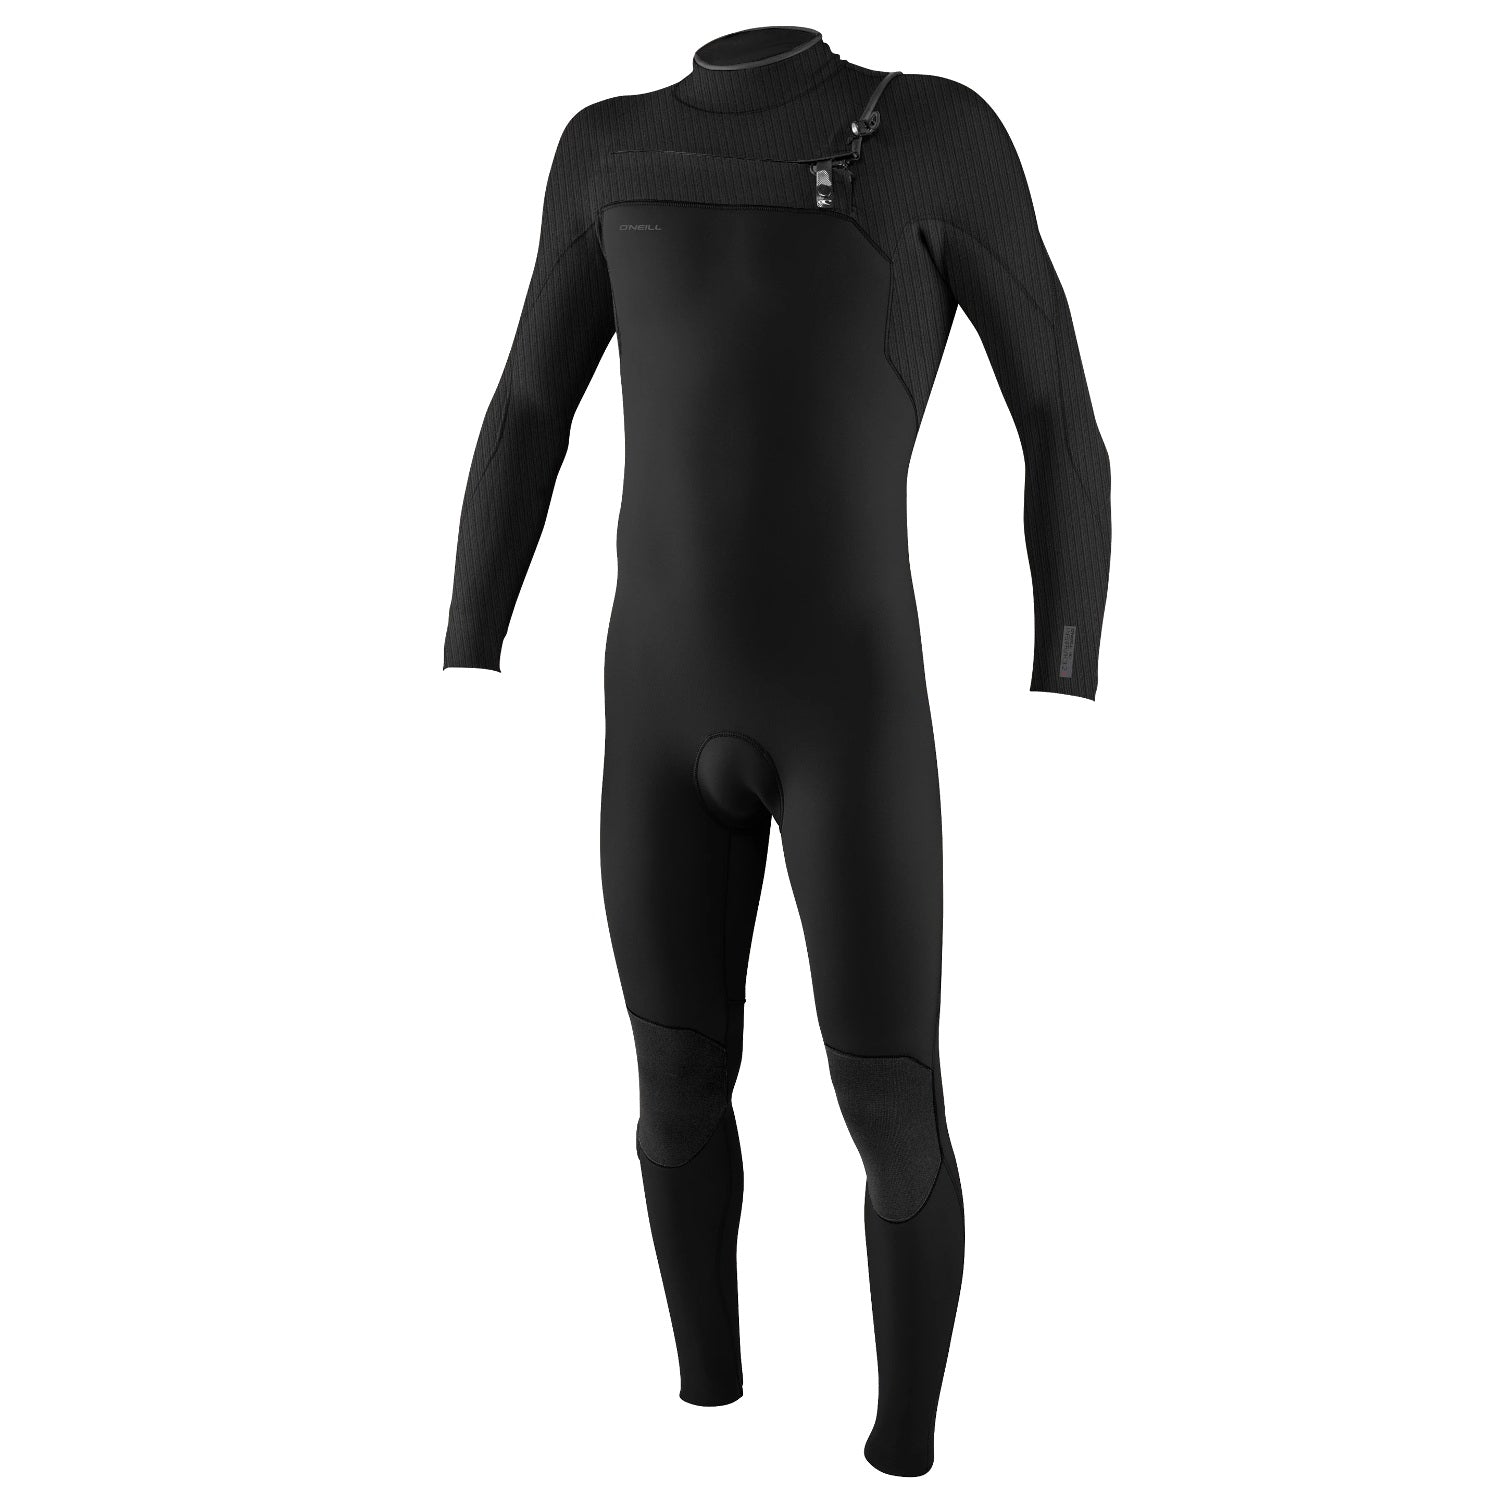 How to Choose a Wetsuit